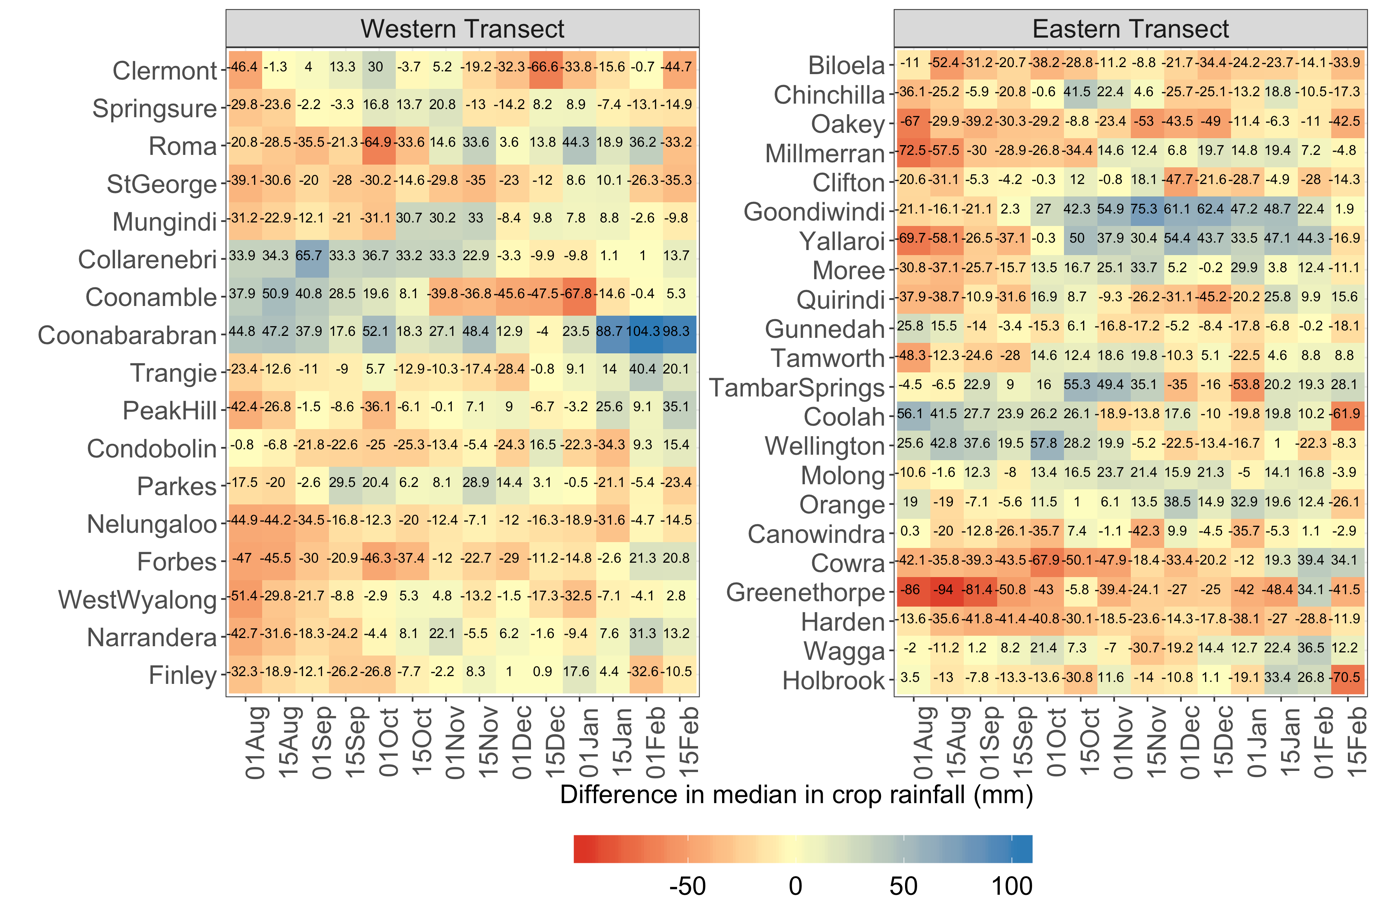 This shows the difference in median in-crop rainfall for the 14 different sowing dates between the two climate periods 1958-1987 and 1988-2017, for locations in western and eastern transects. Red shading indicates a decrease in in-crop rainfall, blue shading indicates an increase in rainfall, and yellow indicates sowing dates with minimal to no difference in rainfall between normals. The values within each cell are the difference in median in in-crop rainfall (mm).